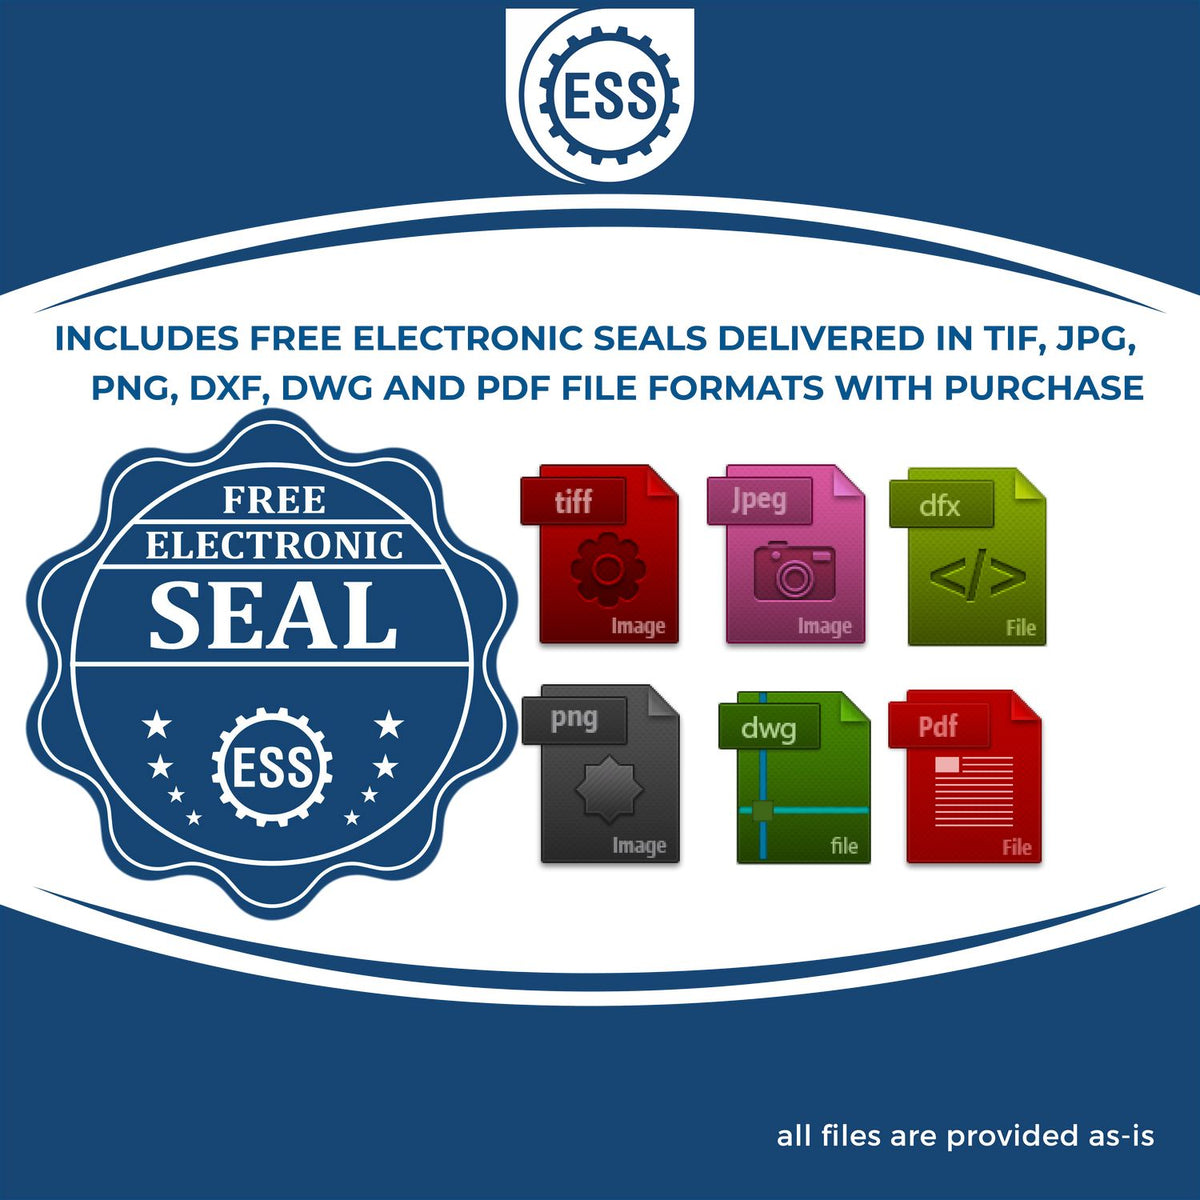 An infographic for the free electronic seal for the Premium MaxLight Pre-Inked South Carolina Engineering Stamp illustrating the different file type icons such as DXF, DWG, TIF, JPG and PNG.